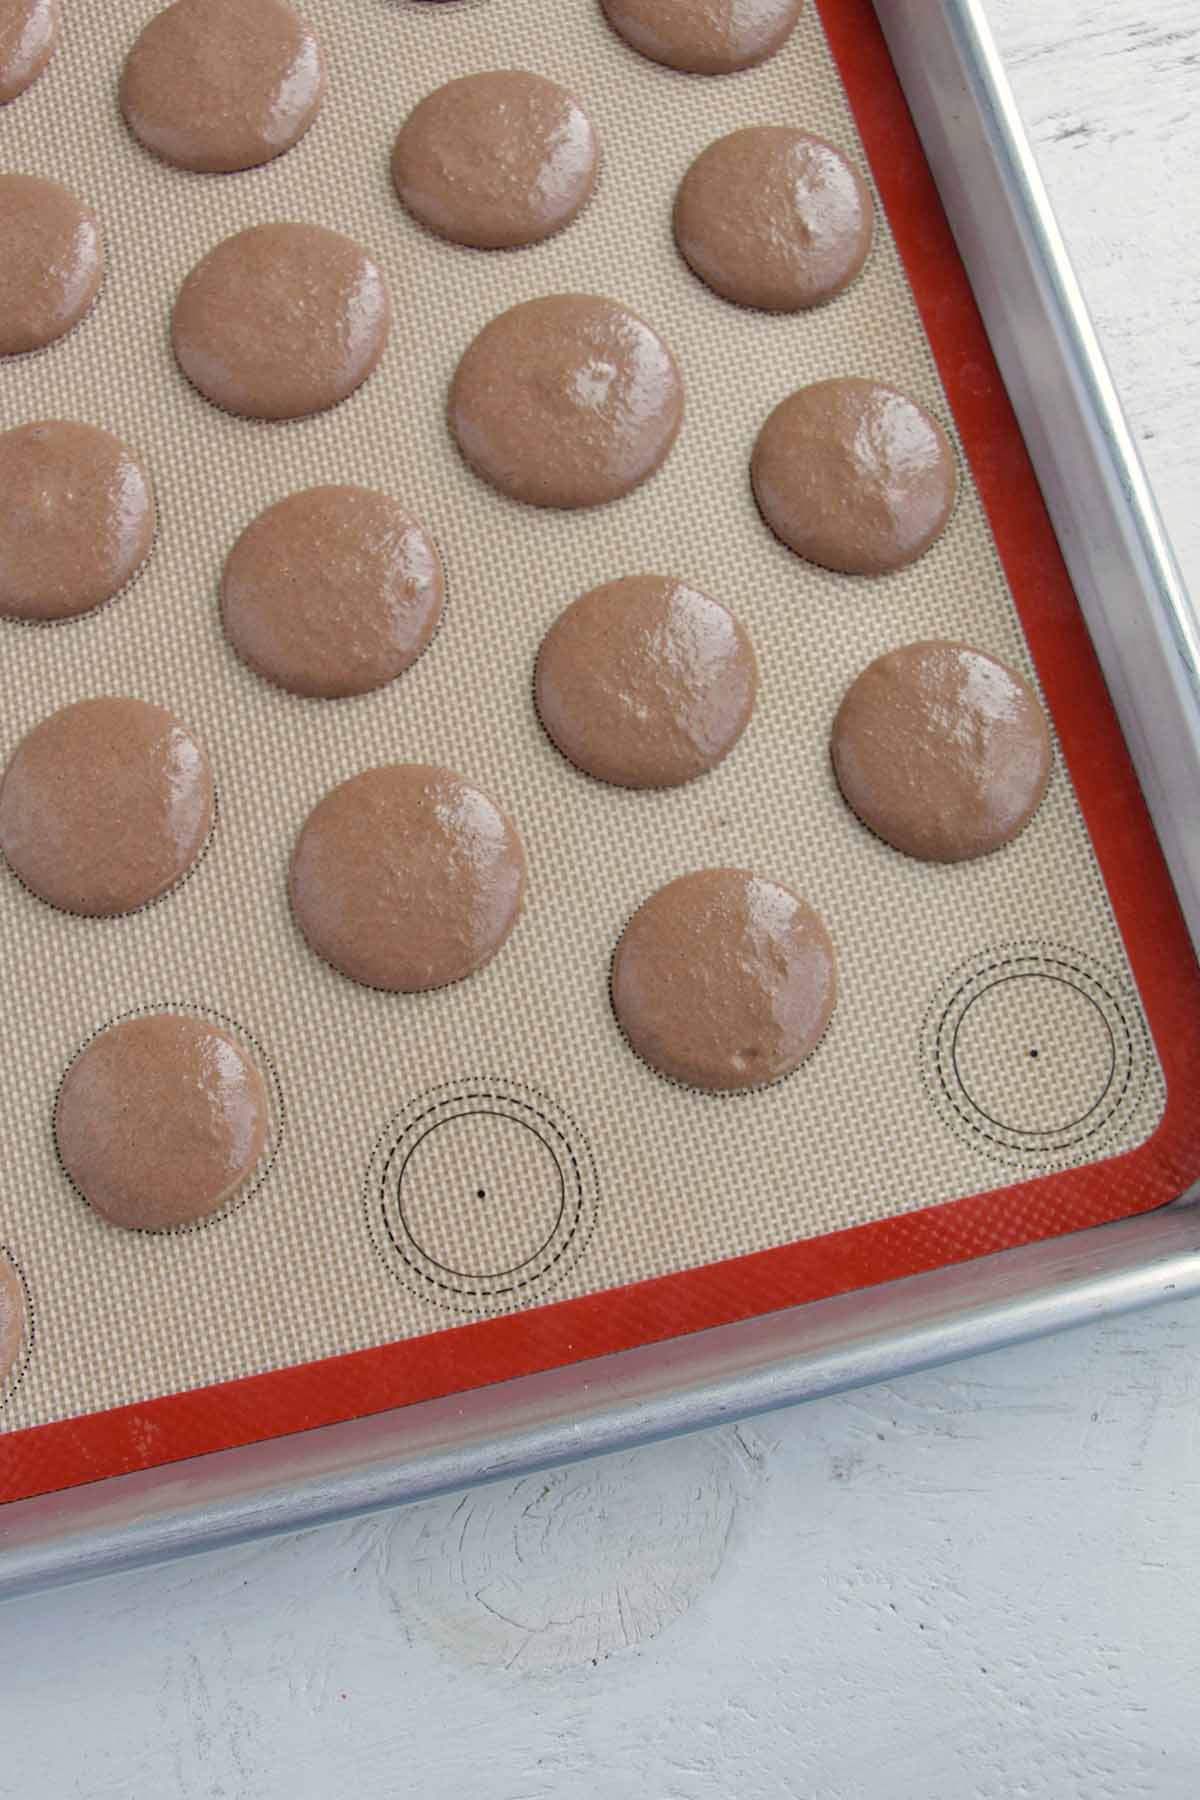 chocolate macarons piped onto a parchment mat.